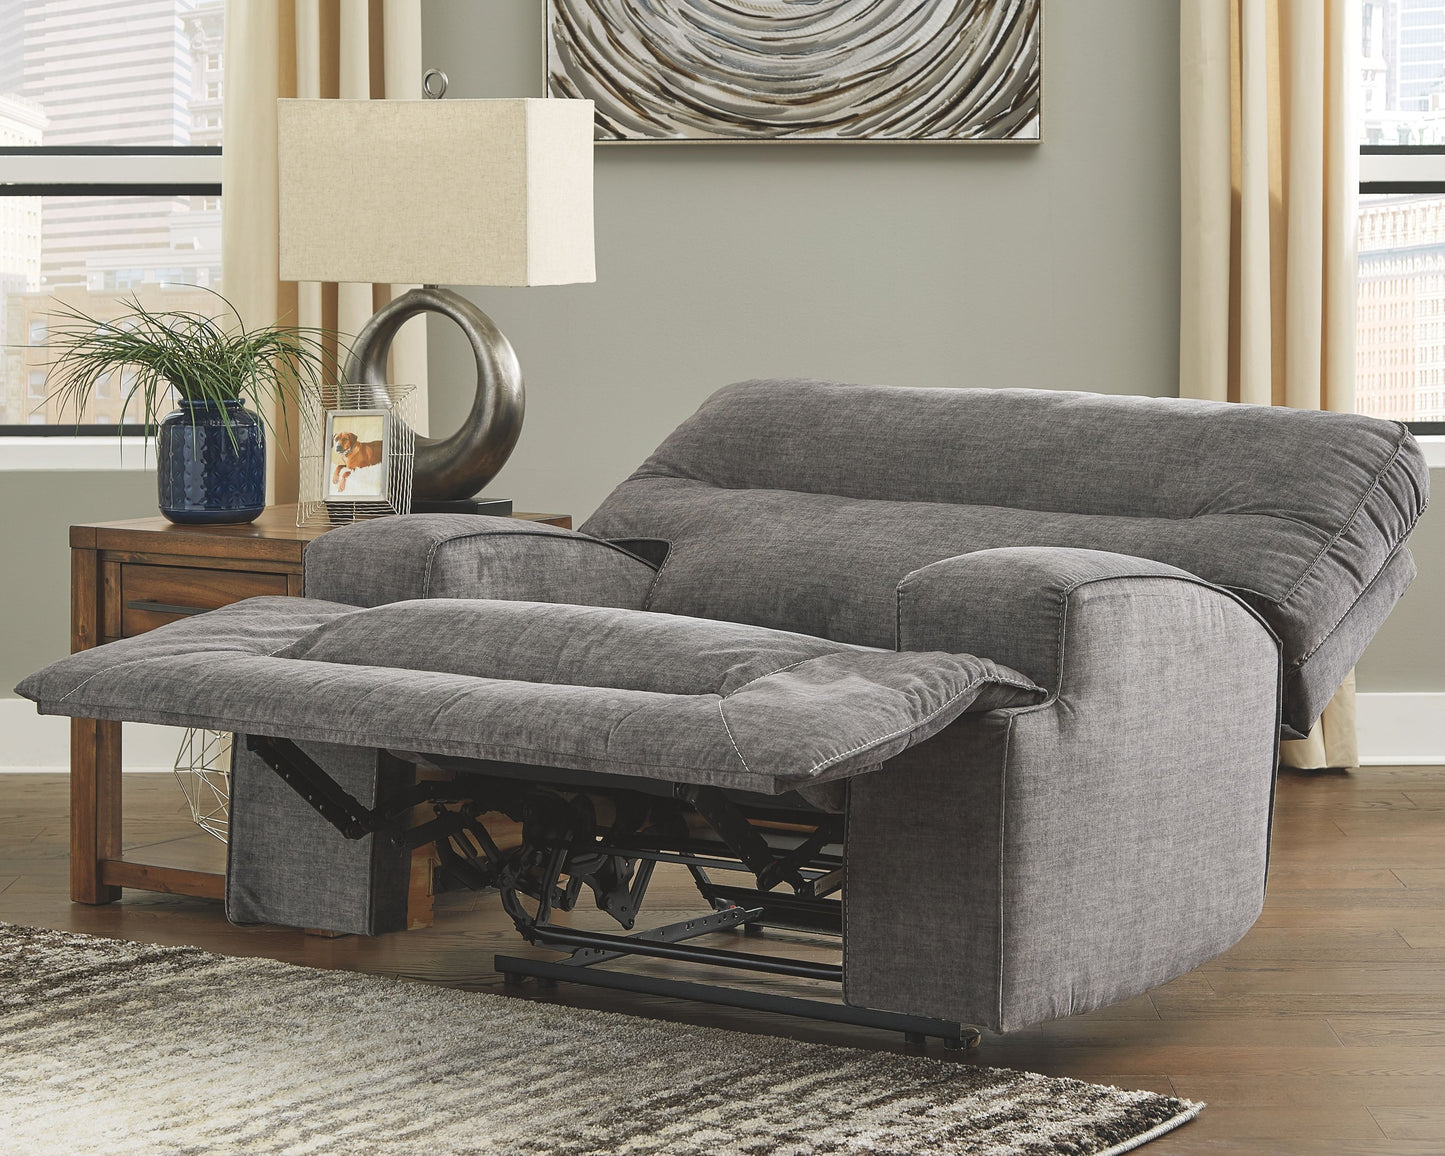 Coombs - Reclining Living Room Set